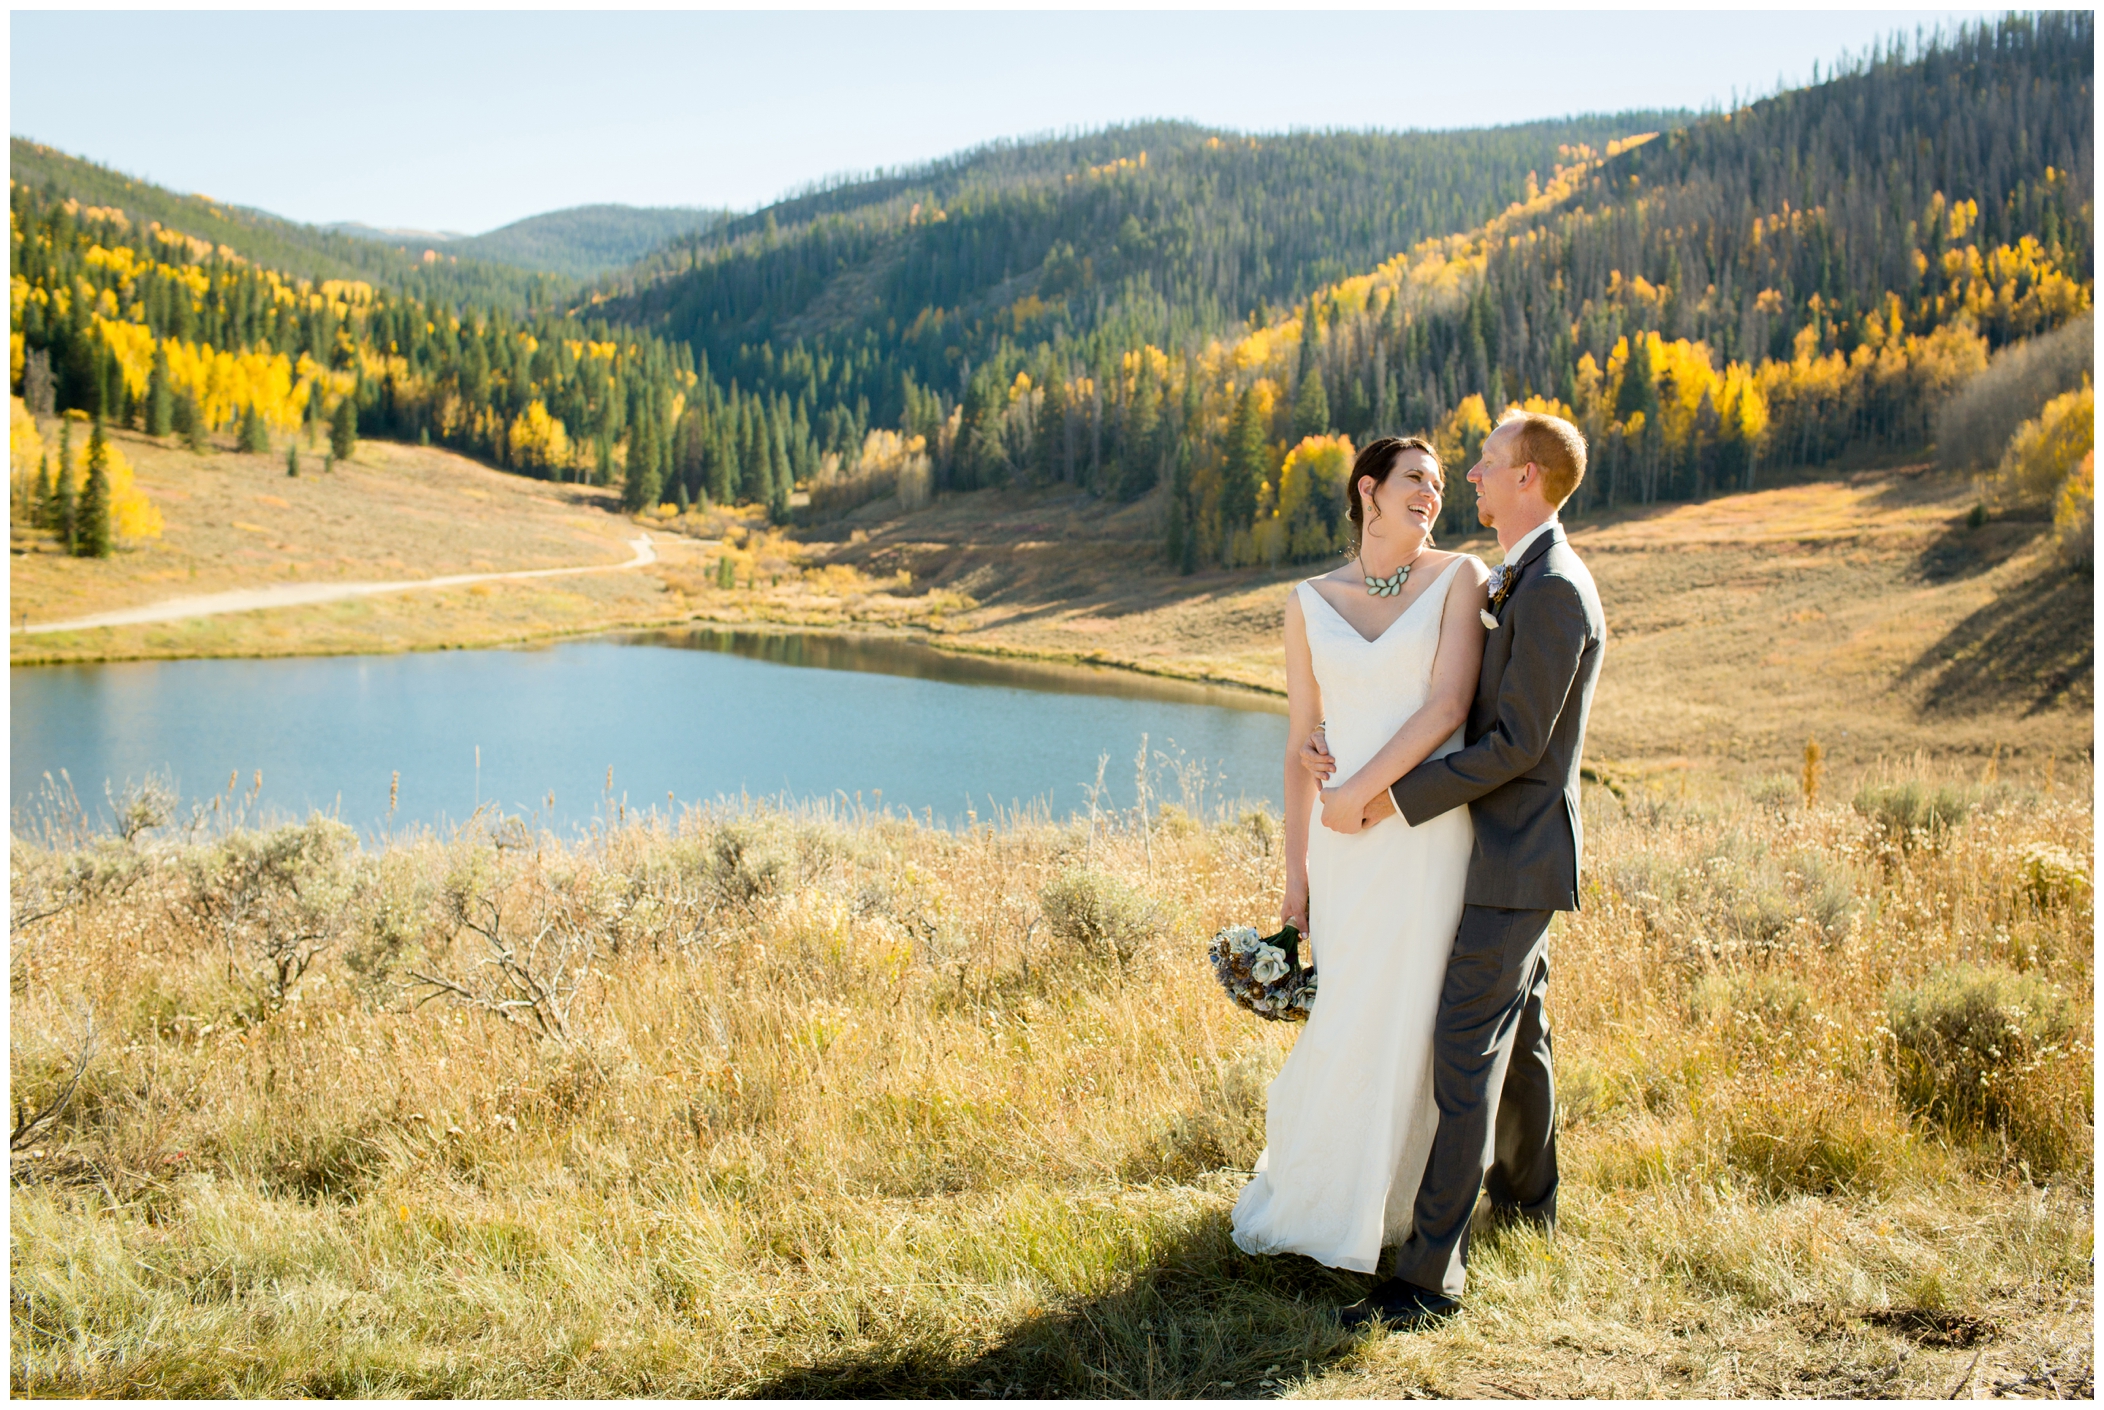 Winter Park wedding photos at YMCA of the Rockies by Colorado photographer Plum Pretty Photography